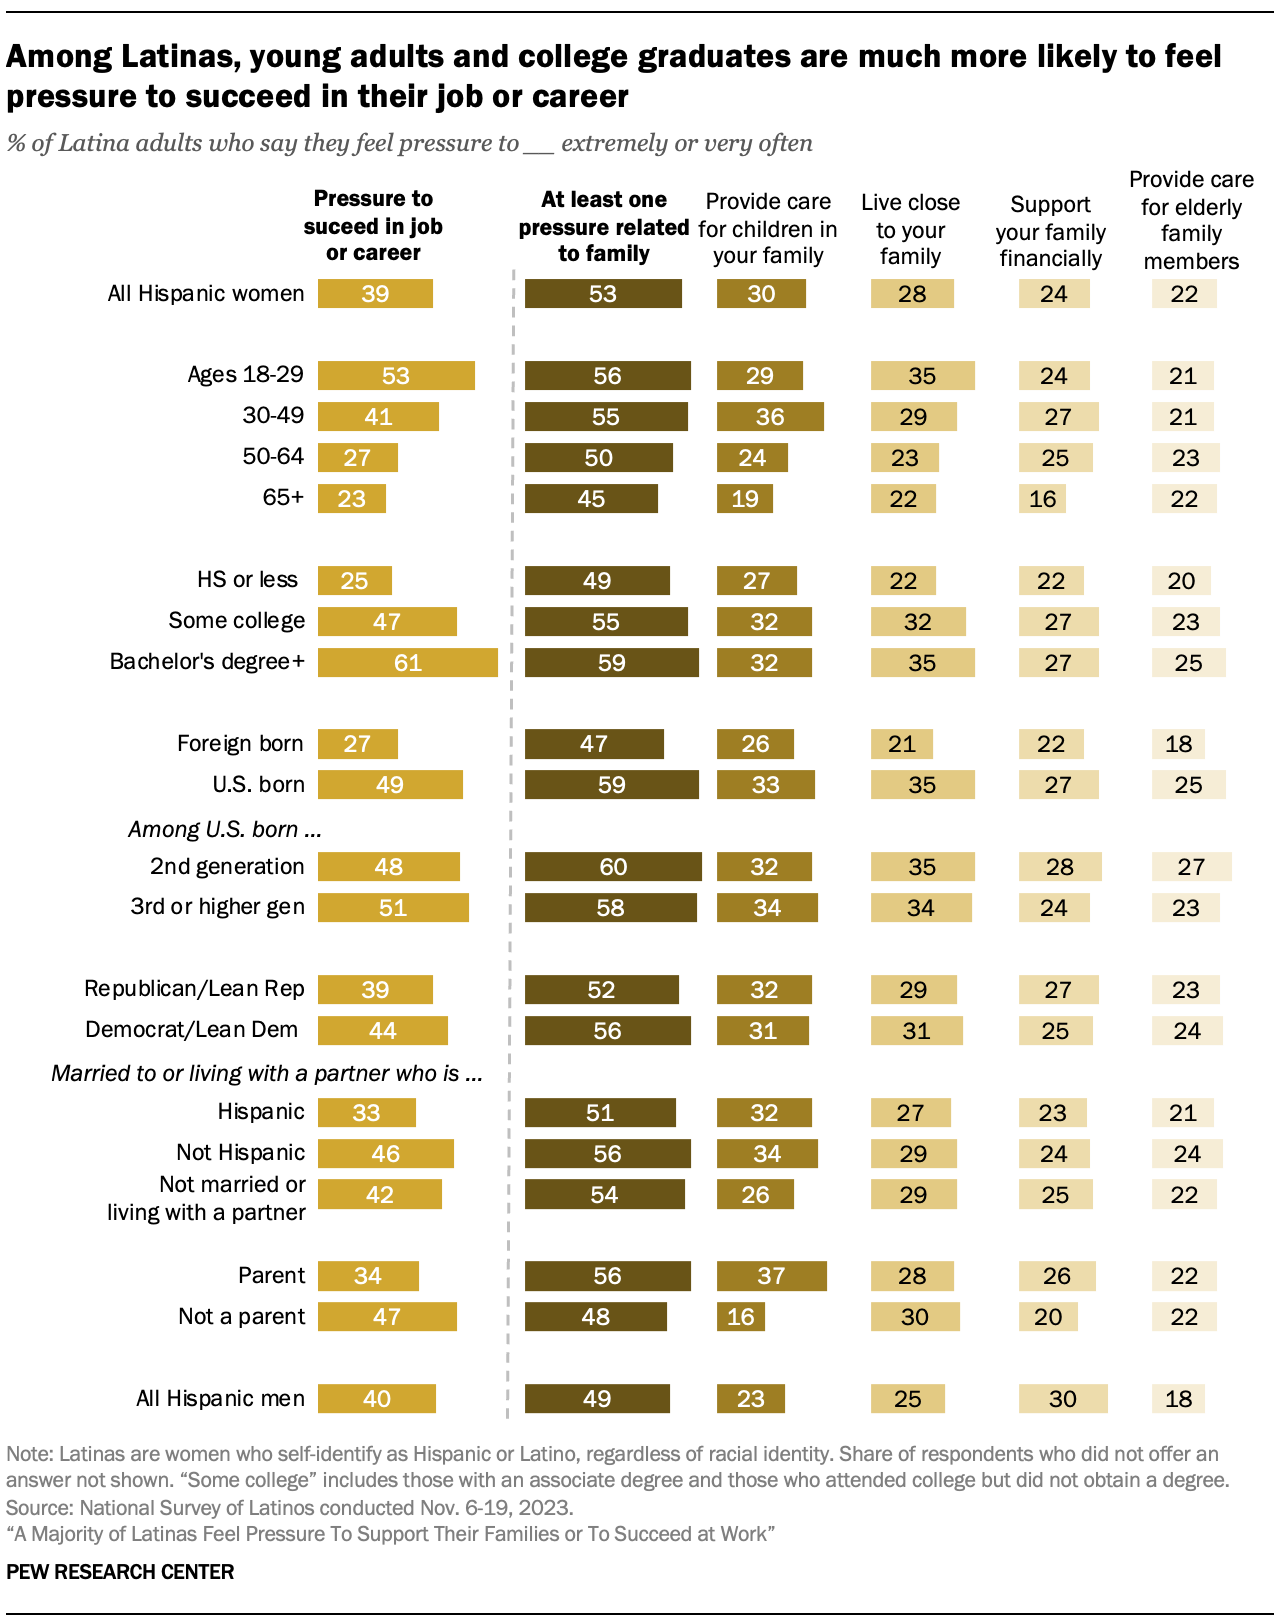 Bar chart comparing the family or career pressures U.S. Latinas say they face across demographic groups. Among Latinas, young adults and college graduates are much more likely to feel pressure to succeed in their job or career